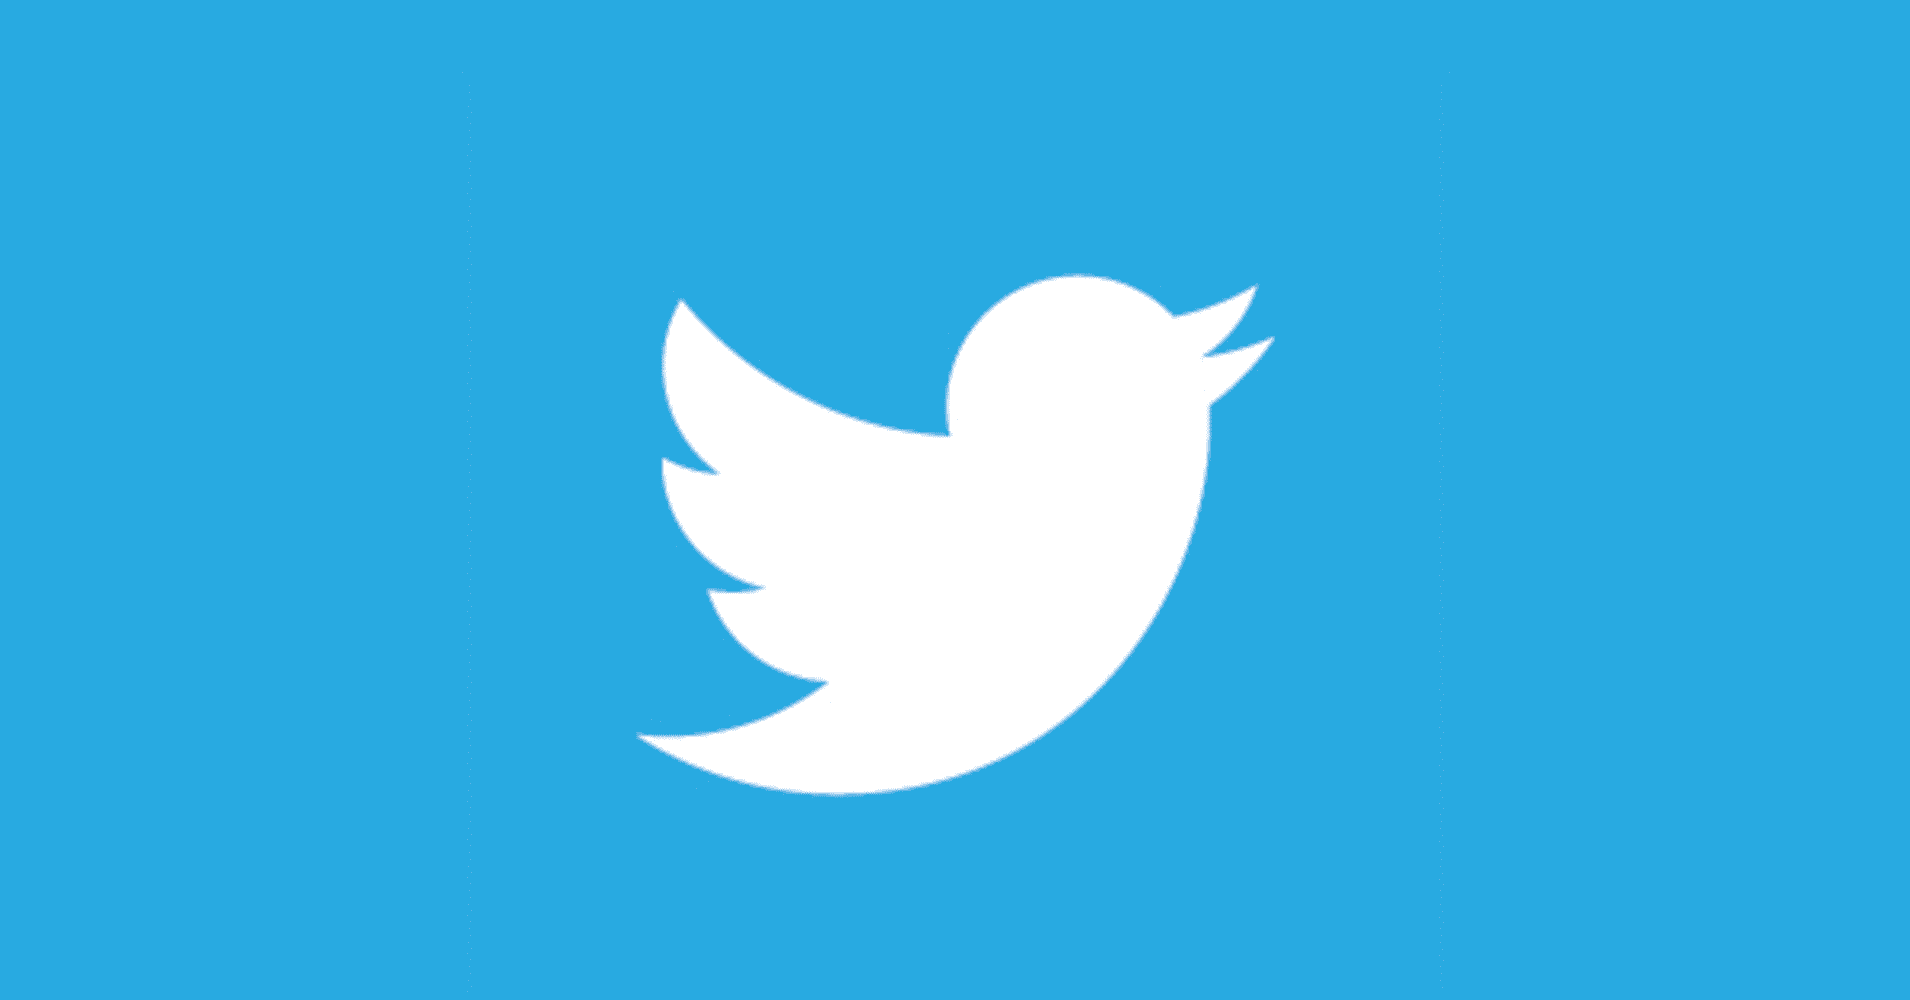 Twitter Rolls Out Stock Search Feature